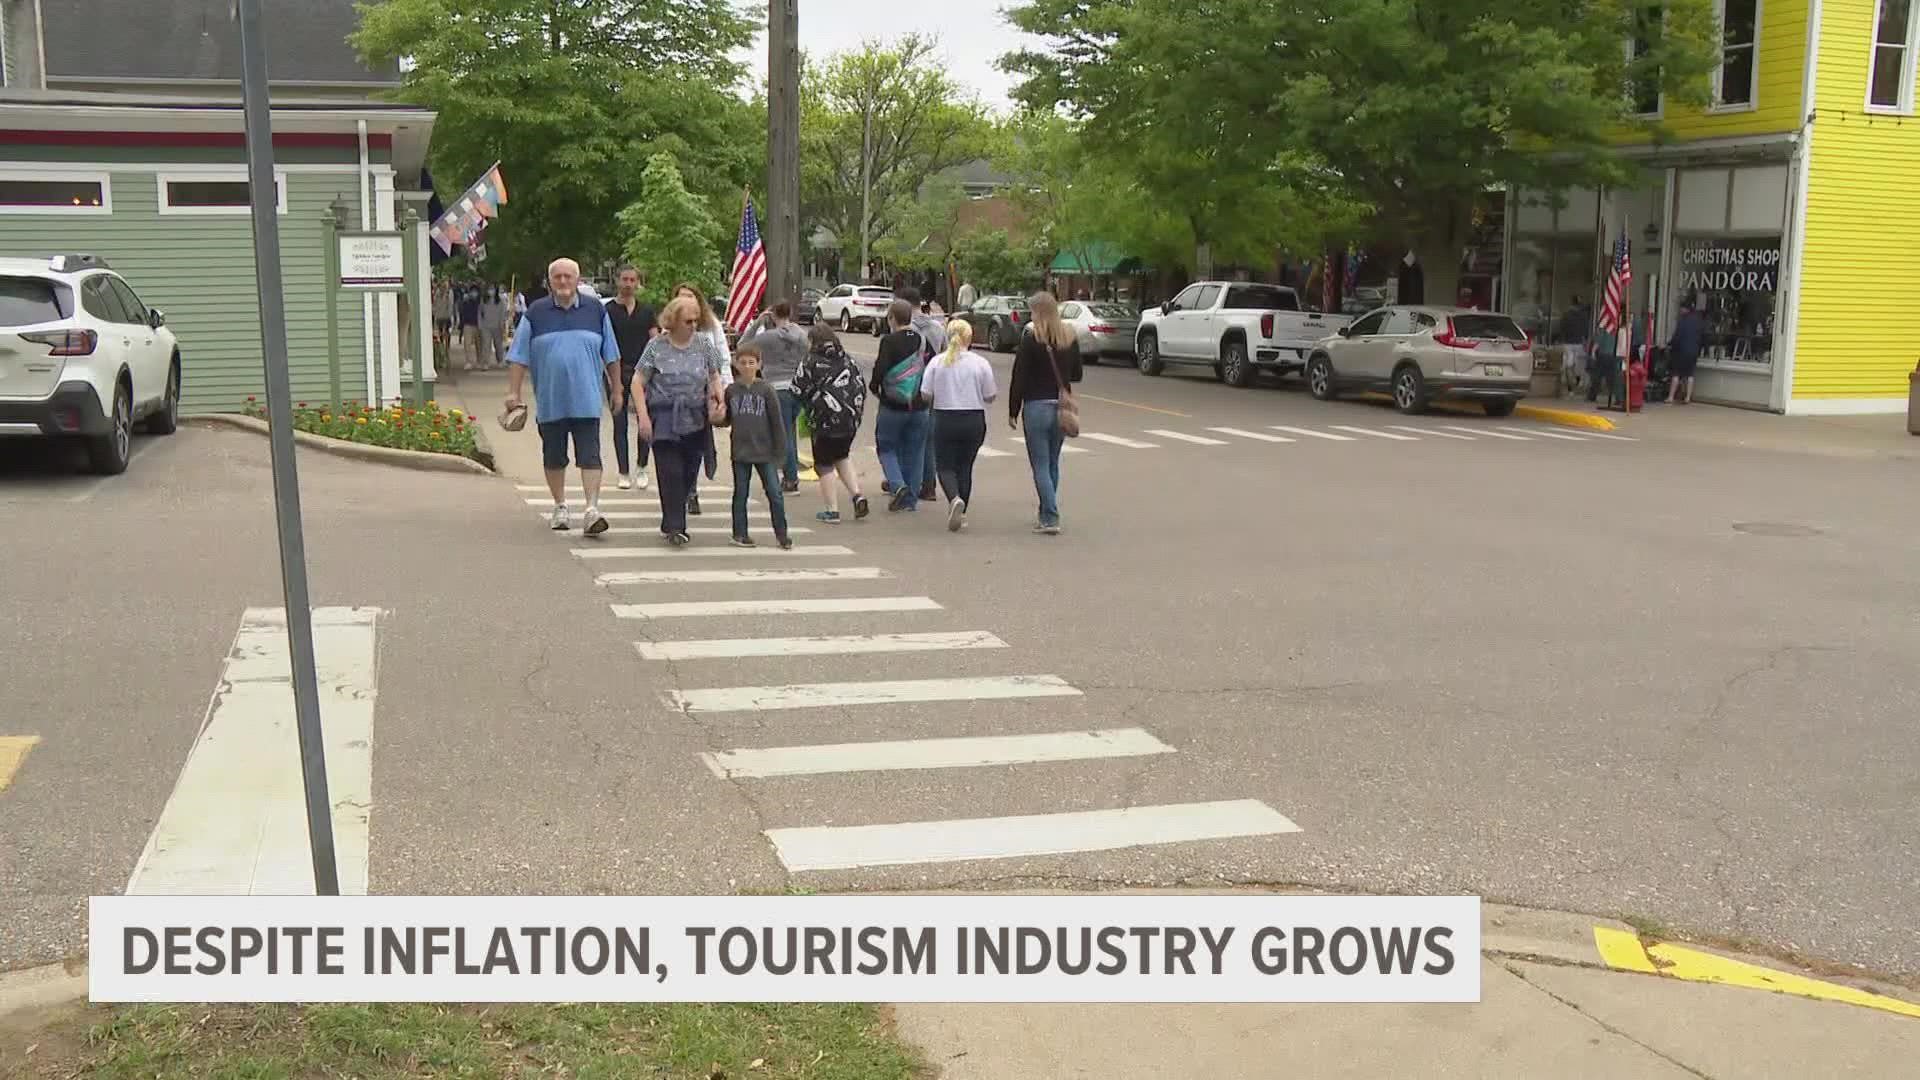 Grand Rapids played host to the U.S. Travel Association's annual seminar. It's a big boost to local economy in itself, as business travel is slower to grow.